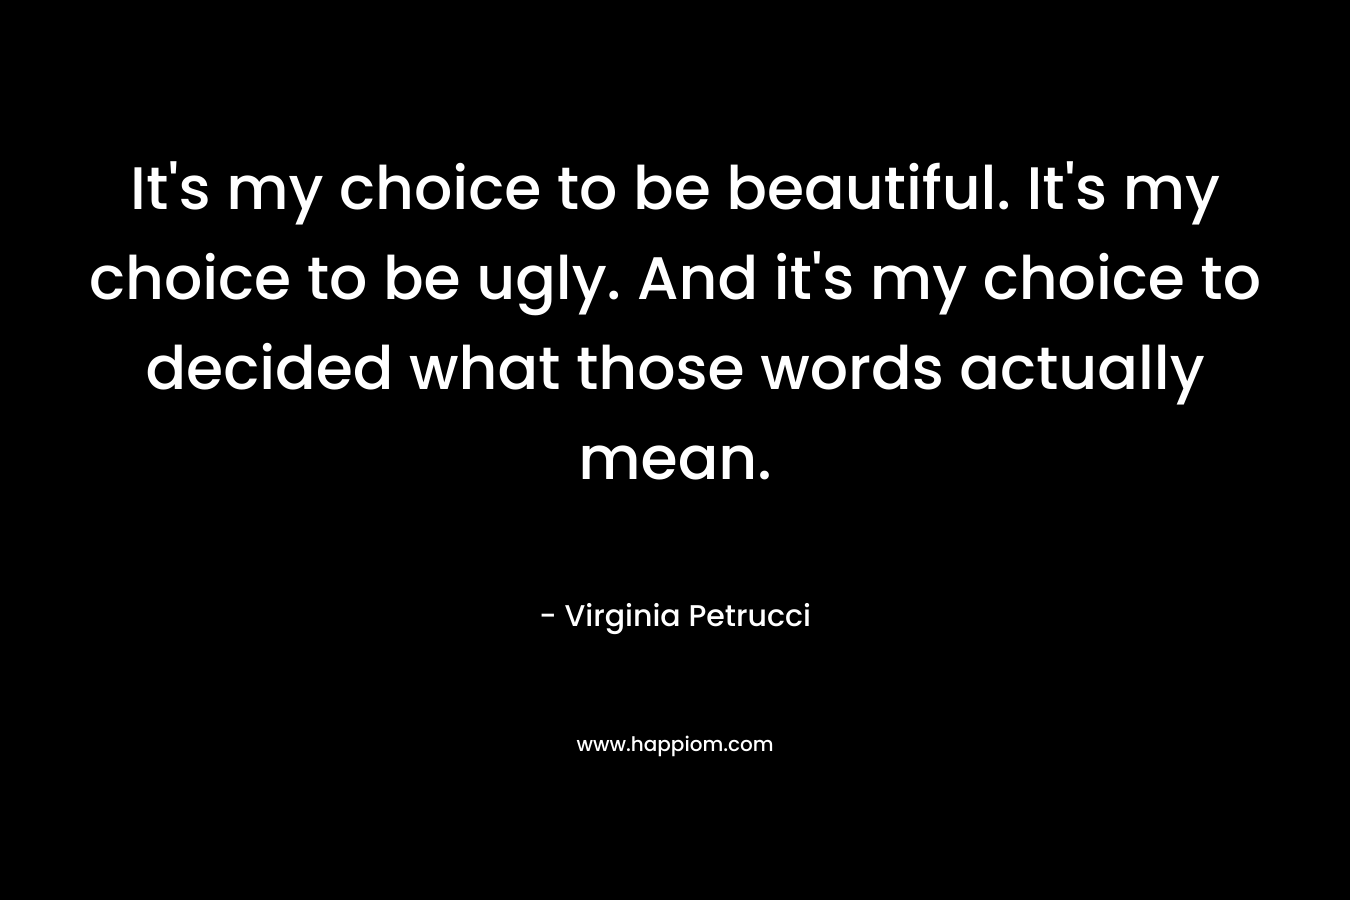 It's my choice to be beautiful. It's my choice to be ugly. And it's my choice to decided what those words actually mean.